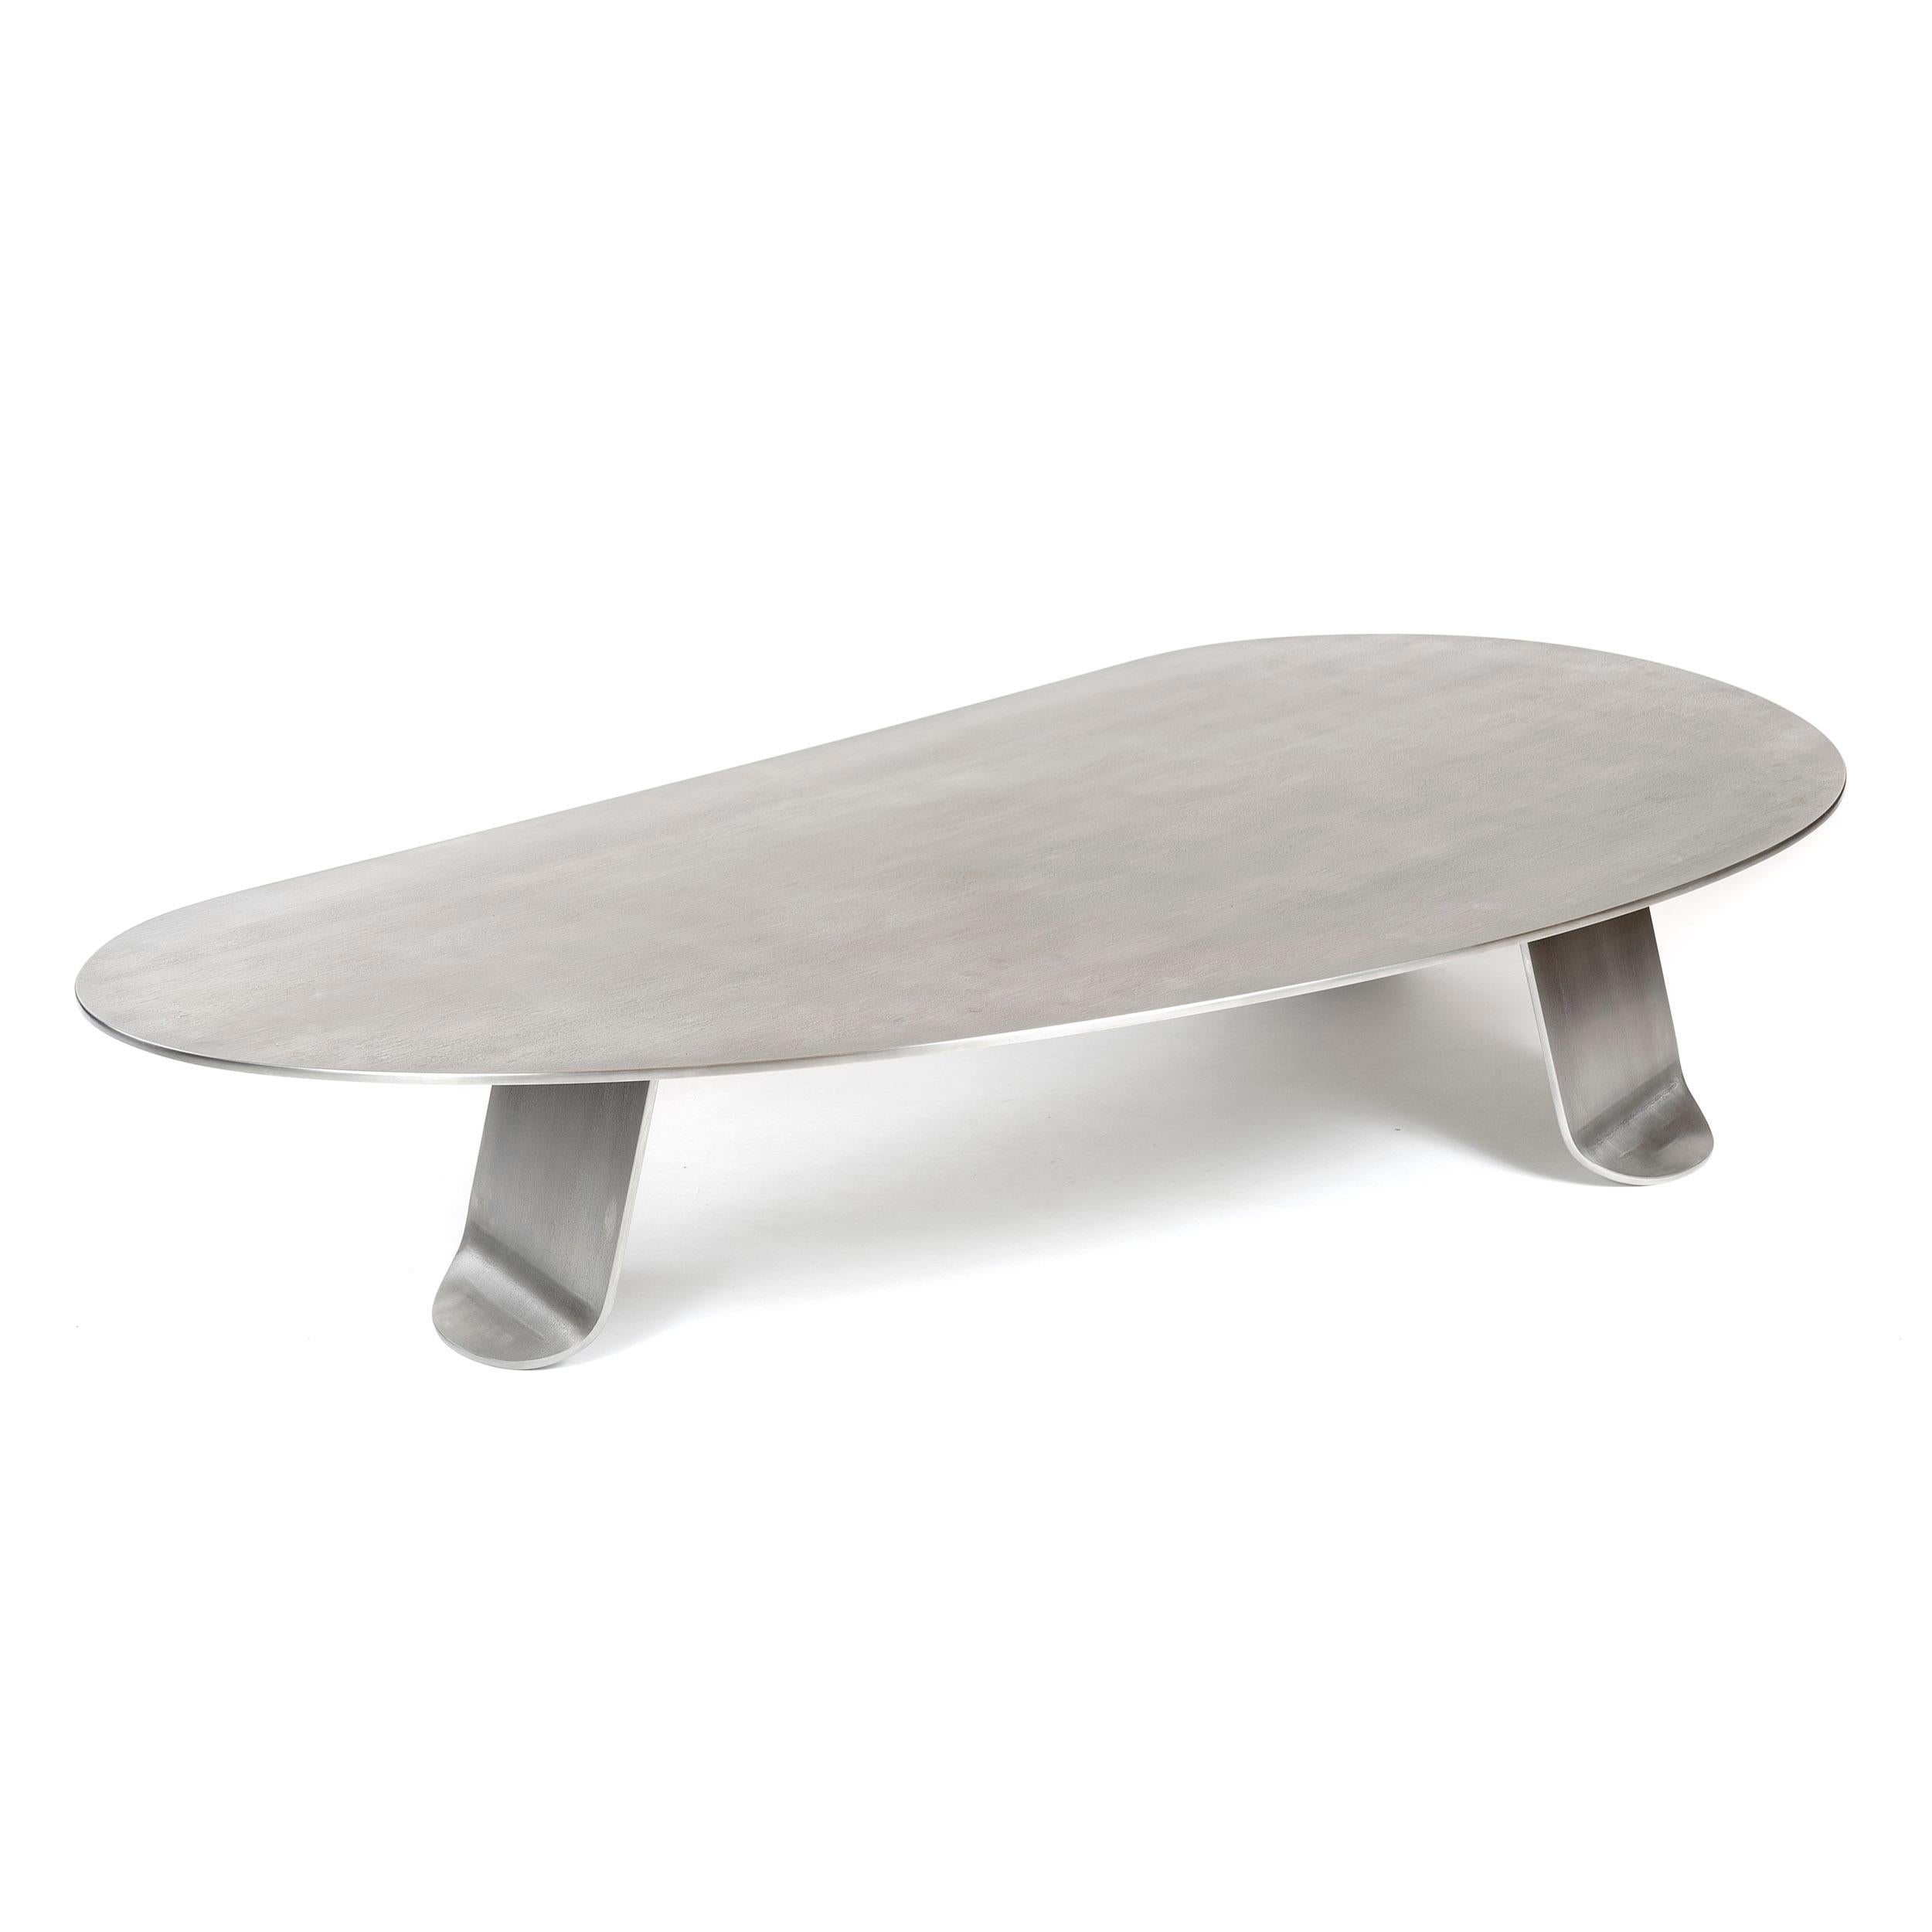 WYETH Chrysalis Table No. 1 in Natural Grain Stainless Steel In New Condition For Sale In Sagaponack, NY